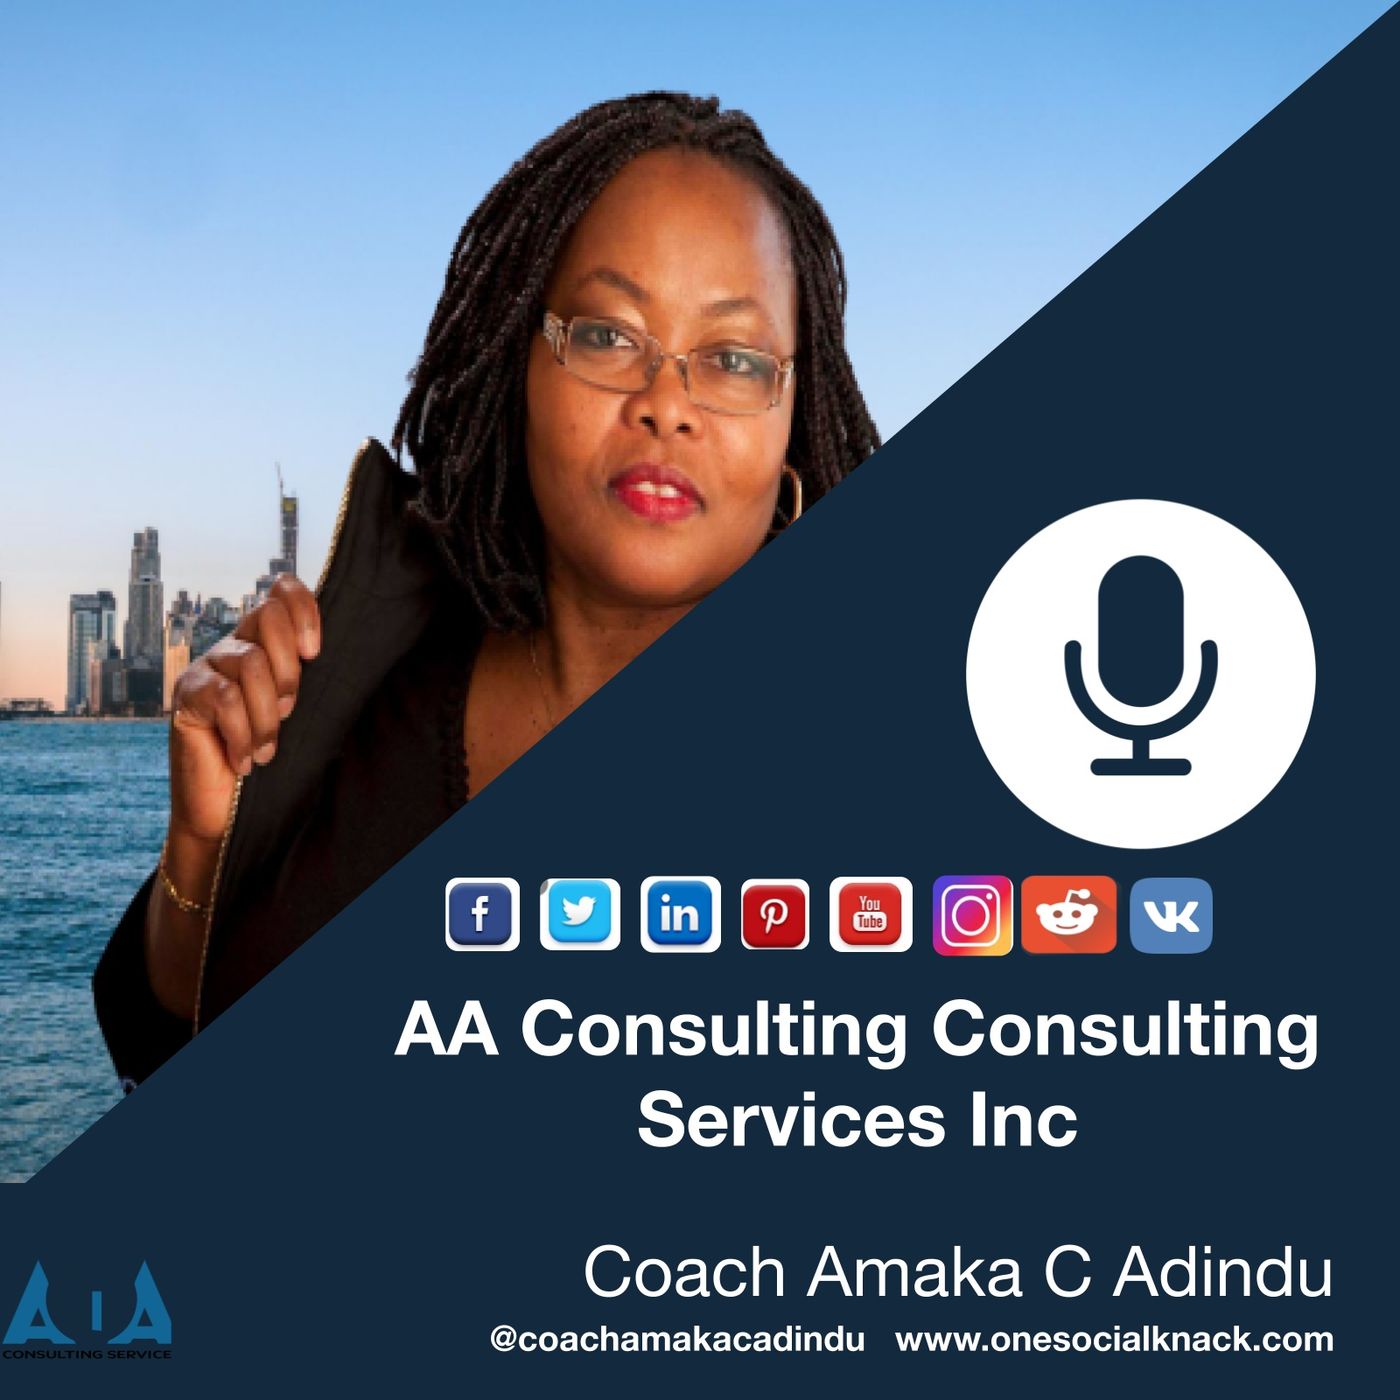 Live with Amaka C Adindu Business Coach, Author, and Speaker Video Marketing - Content creation